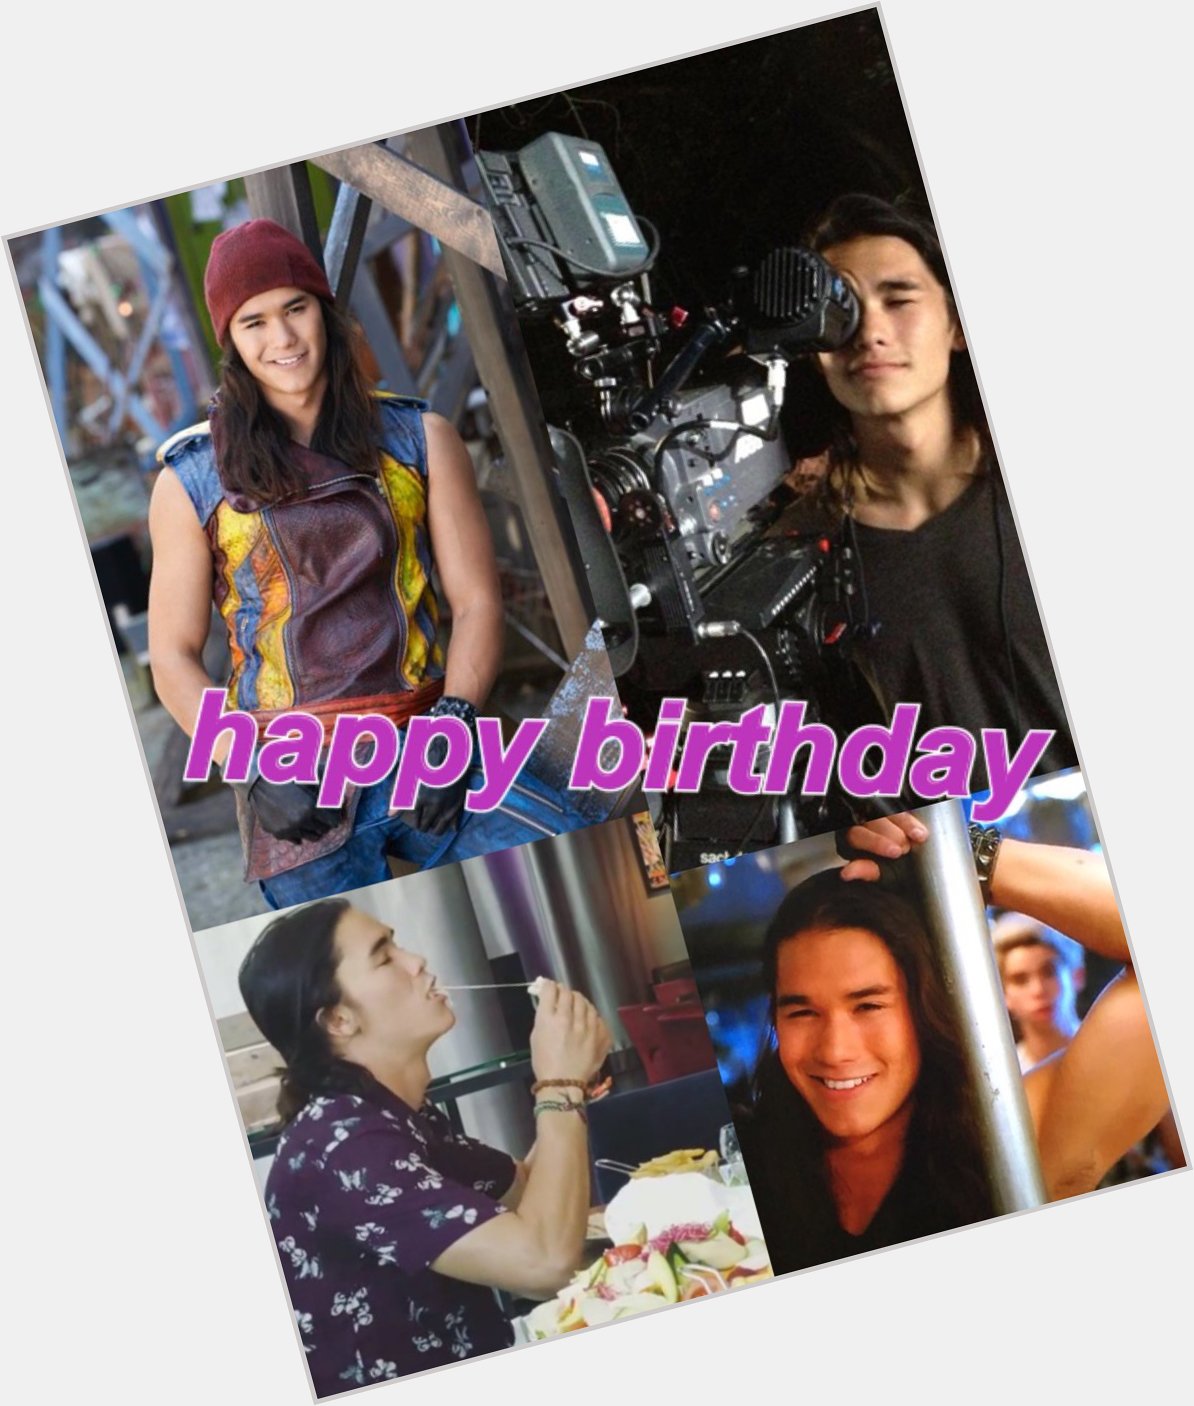  Happy birthday Booboo stewart!!
Thank you for being born!
I love  you 